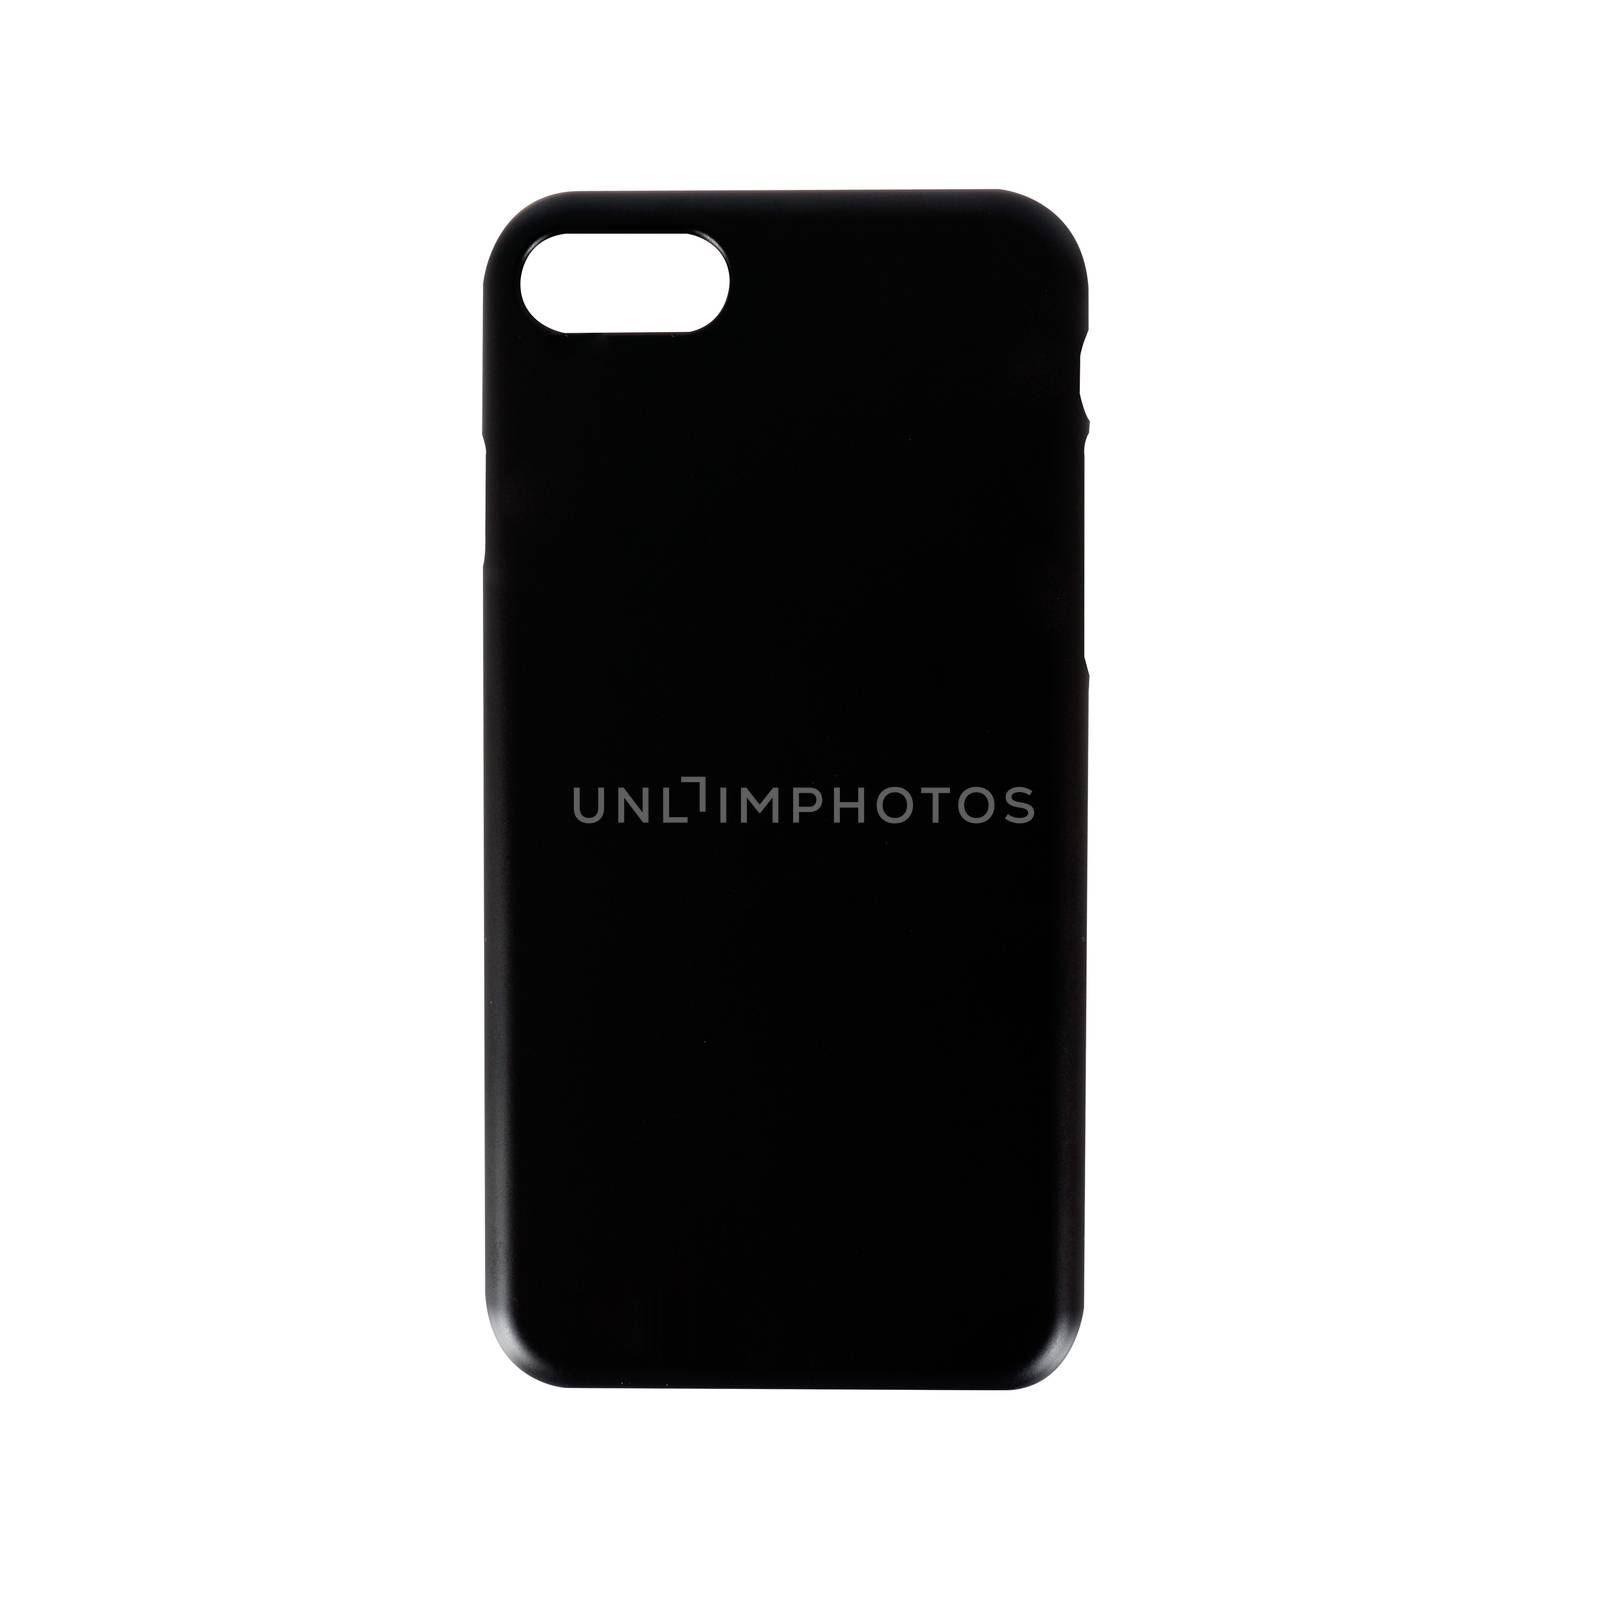 Smart phone case isolated on white background by uphotopia